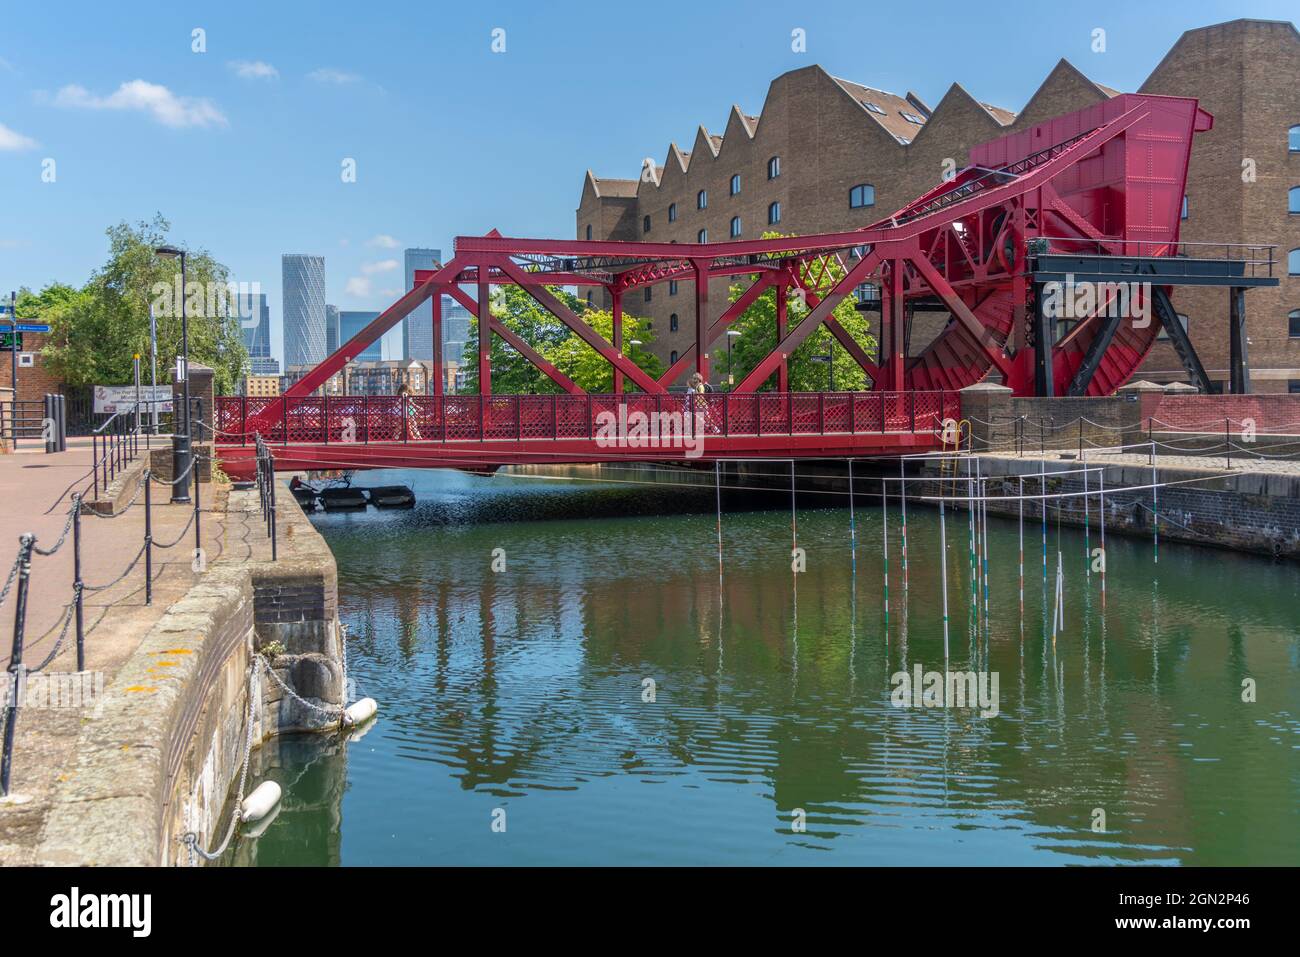 View of Canary Wharf Financial District and Bascule Bridge at the Shadwell Basin, Wapping, London, England, United Kingdom, Europe Stock Photo